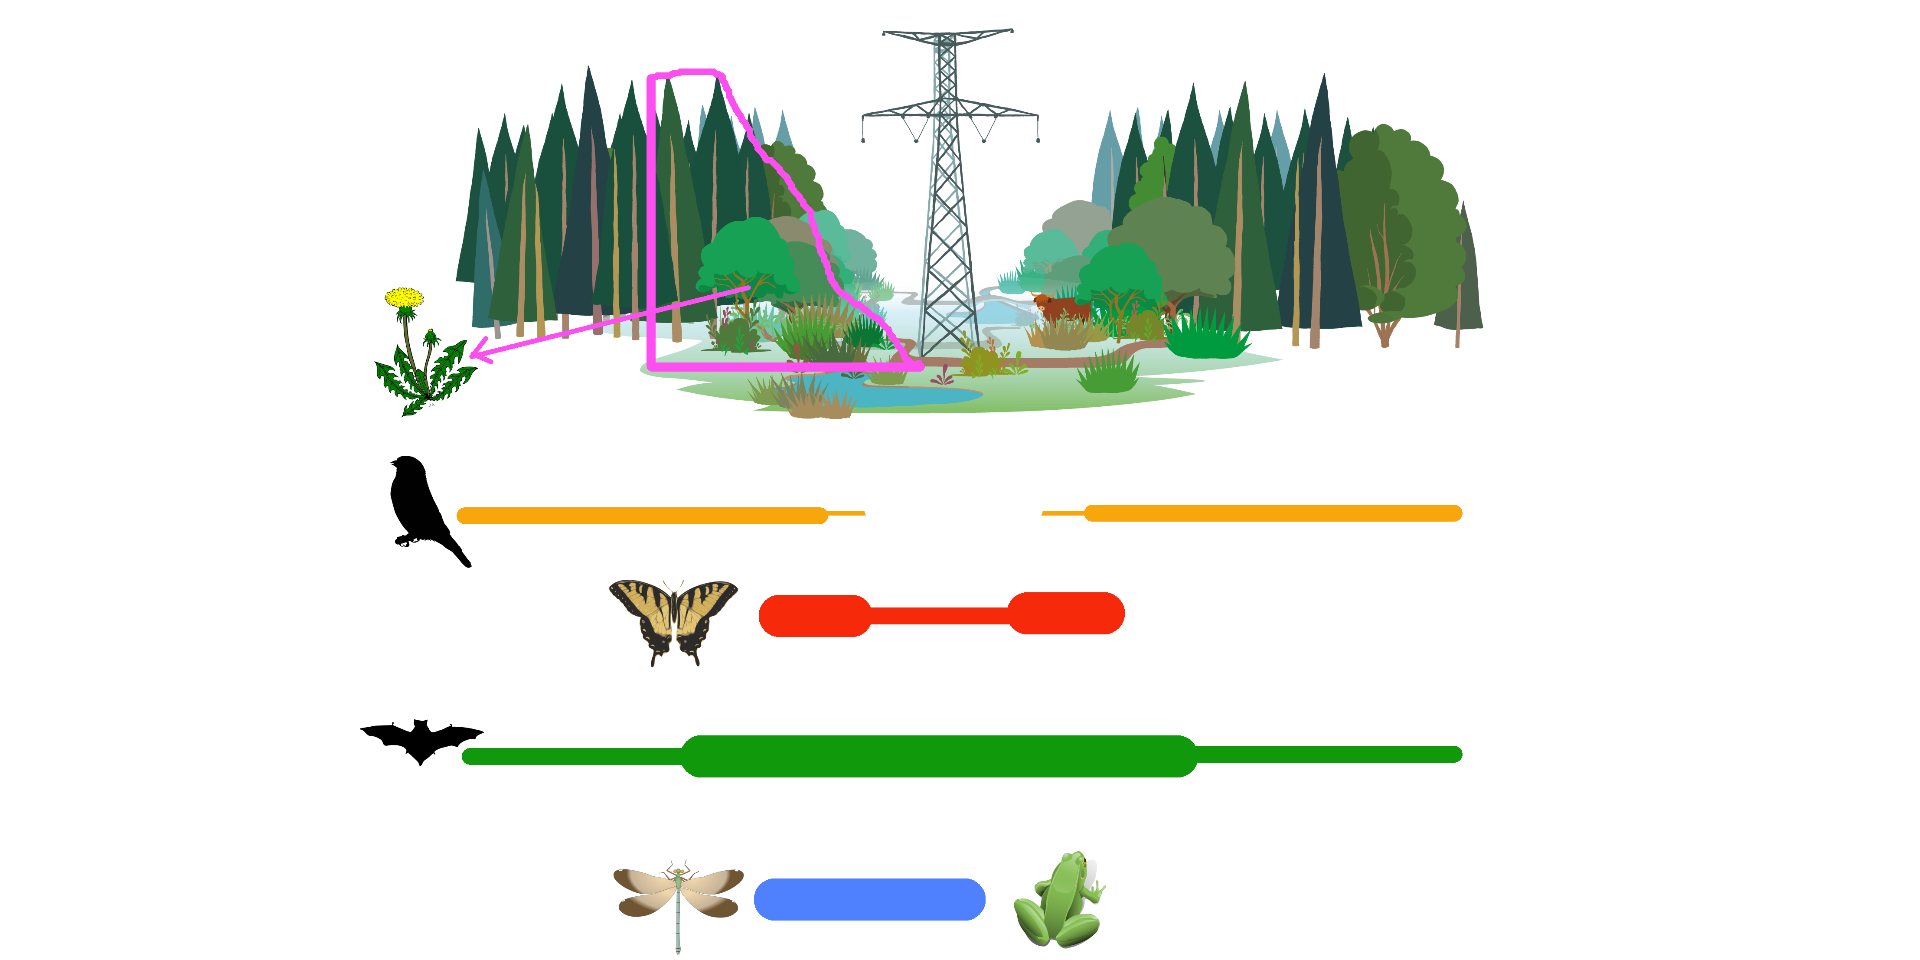 Schematic representation of the relevance of the groups studied in the different compartments of the studied habitats: forests, edges, grasslands and ponds. The thickness of the lines indicates the relevance of the study of these groups according to the habitat in which they are located in the corridor.